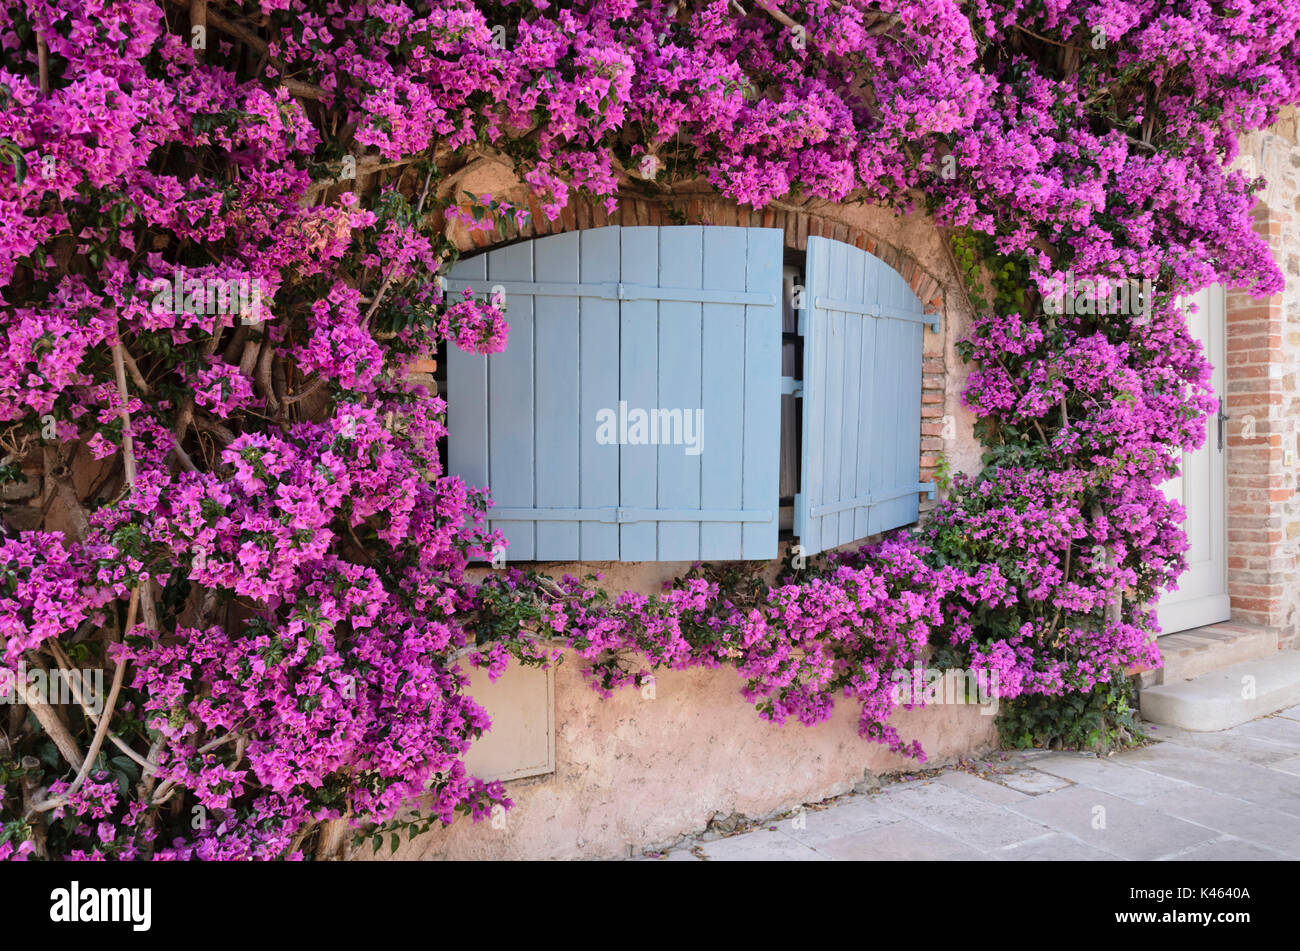 Bougainvillea at an old town house, Grimaud, France Stock Photo